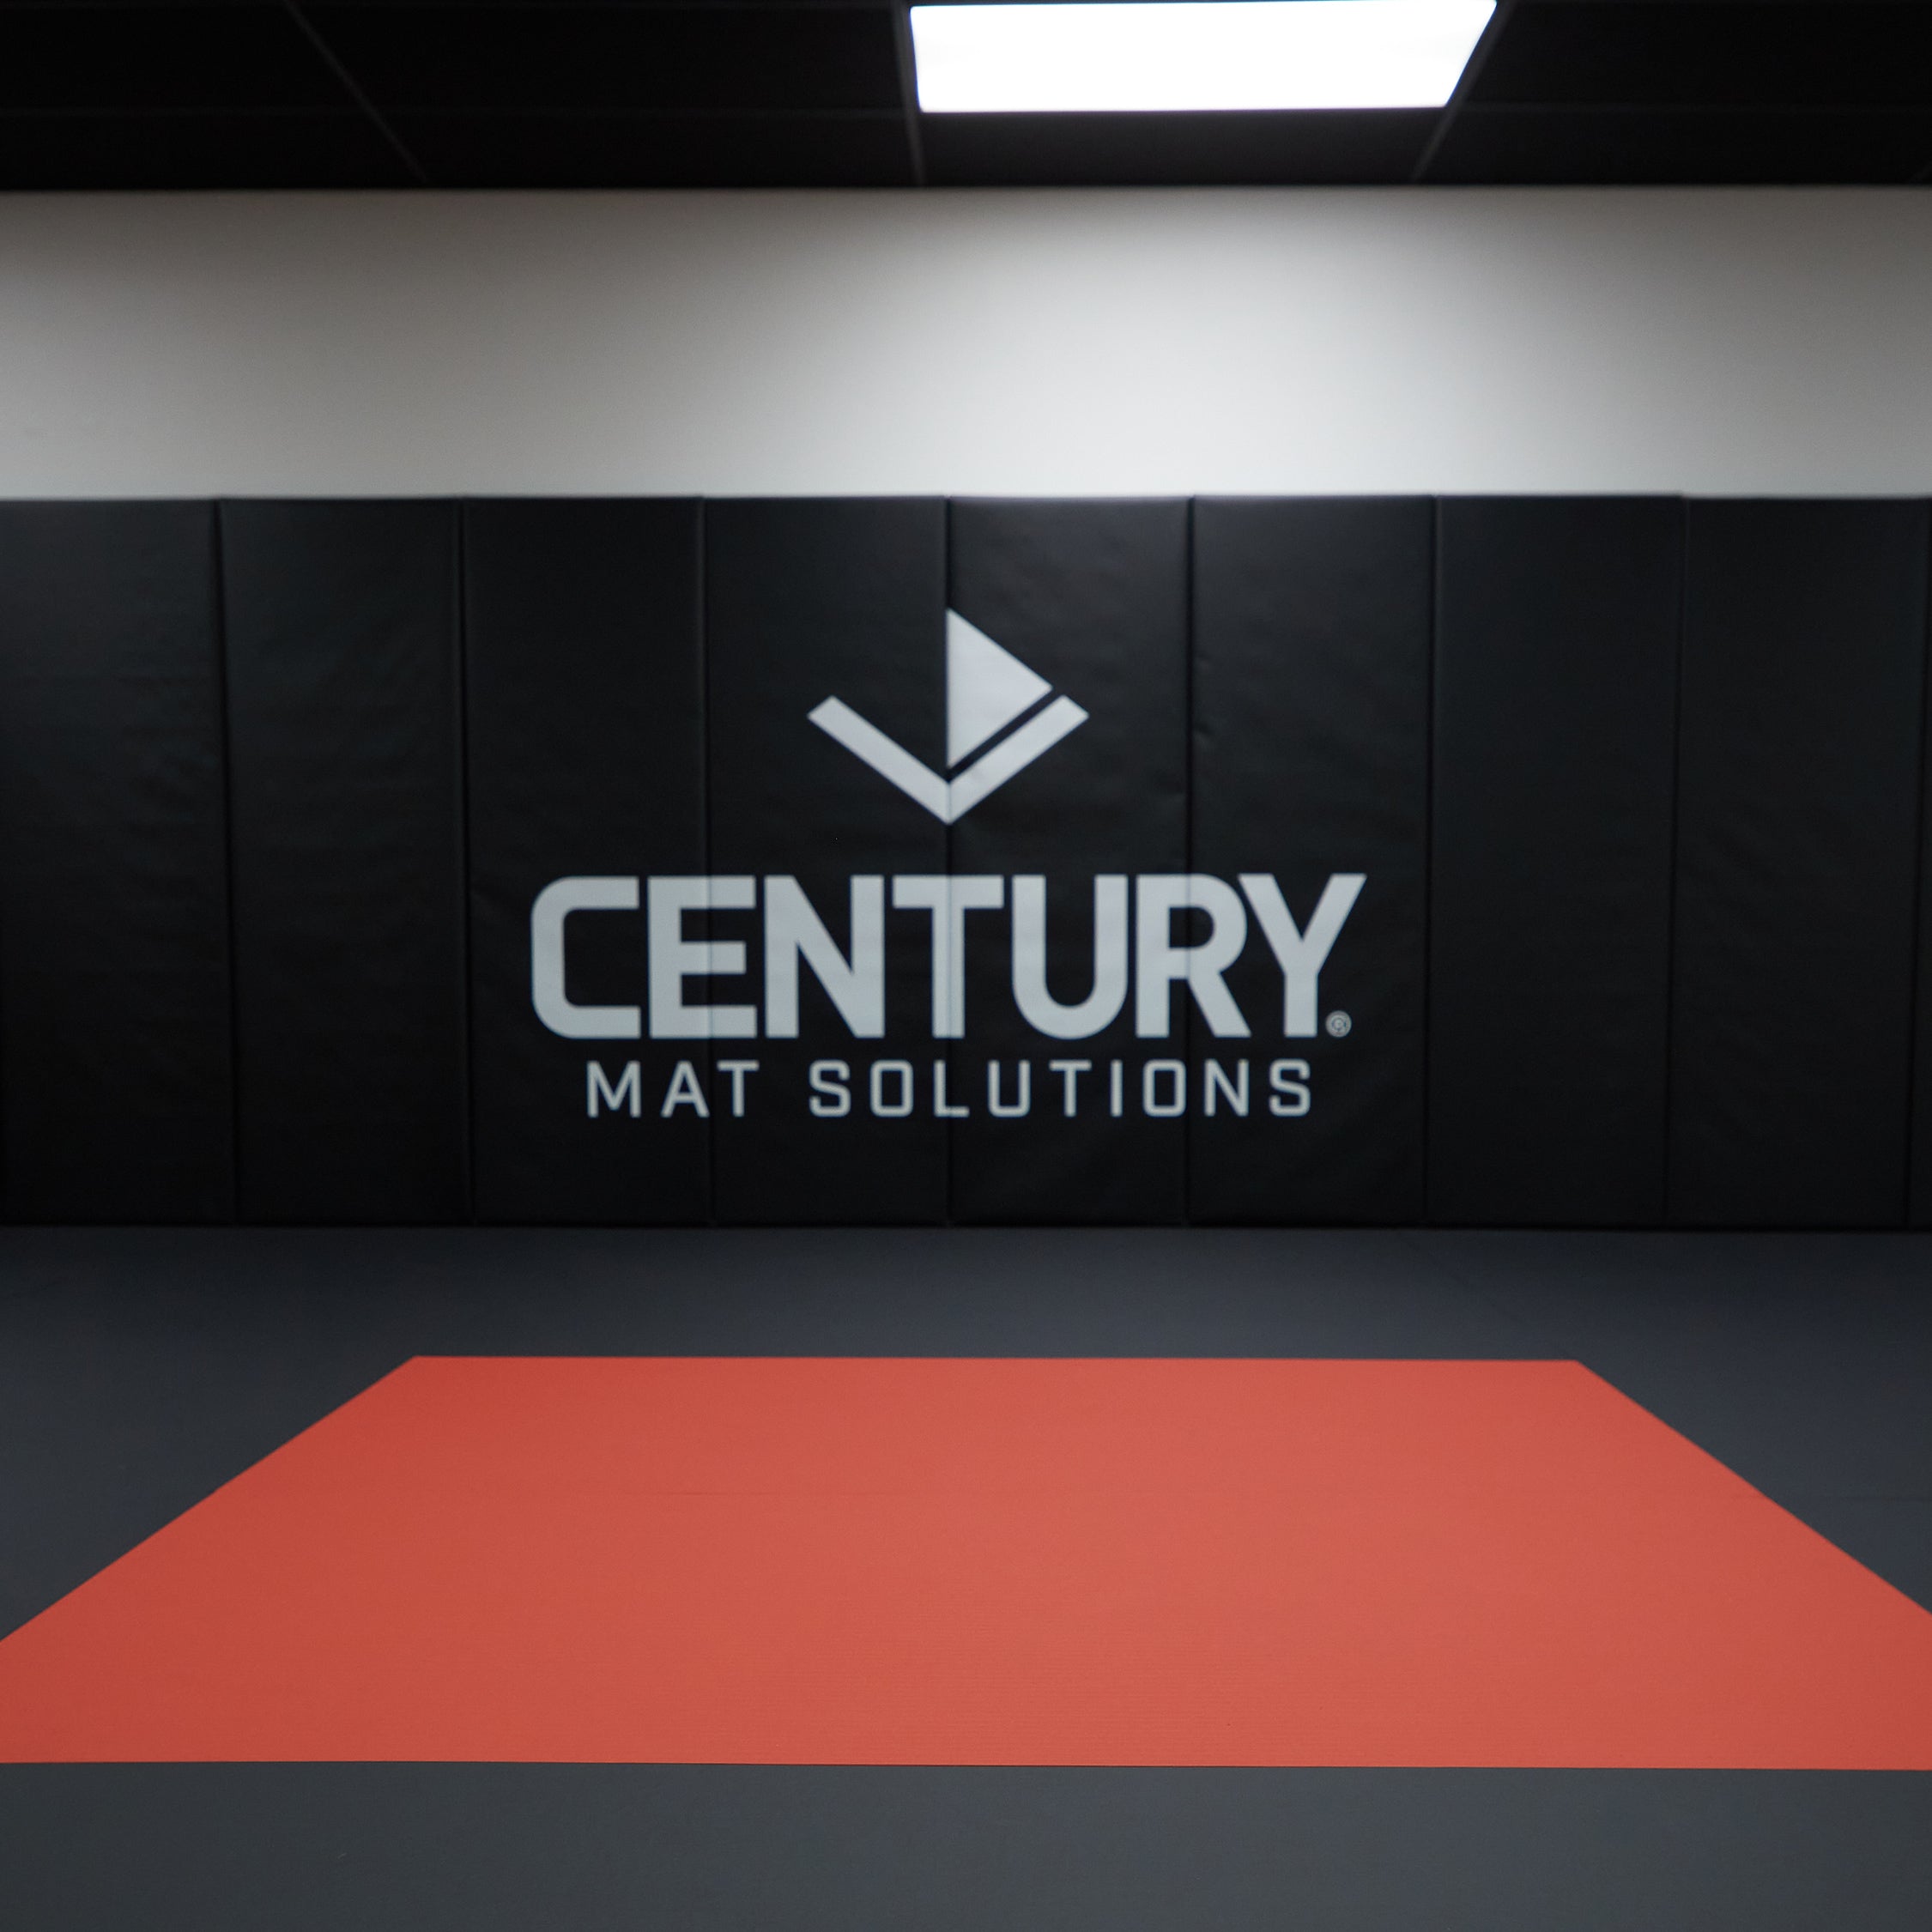 century wall mats for martial arts or gym flooring